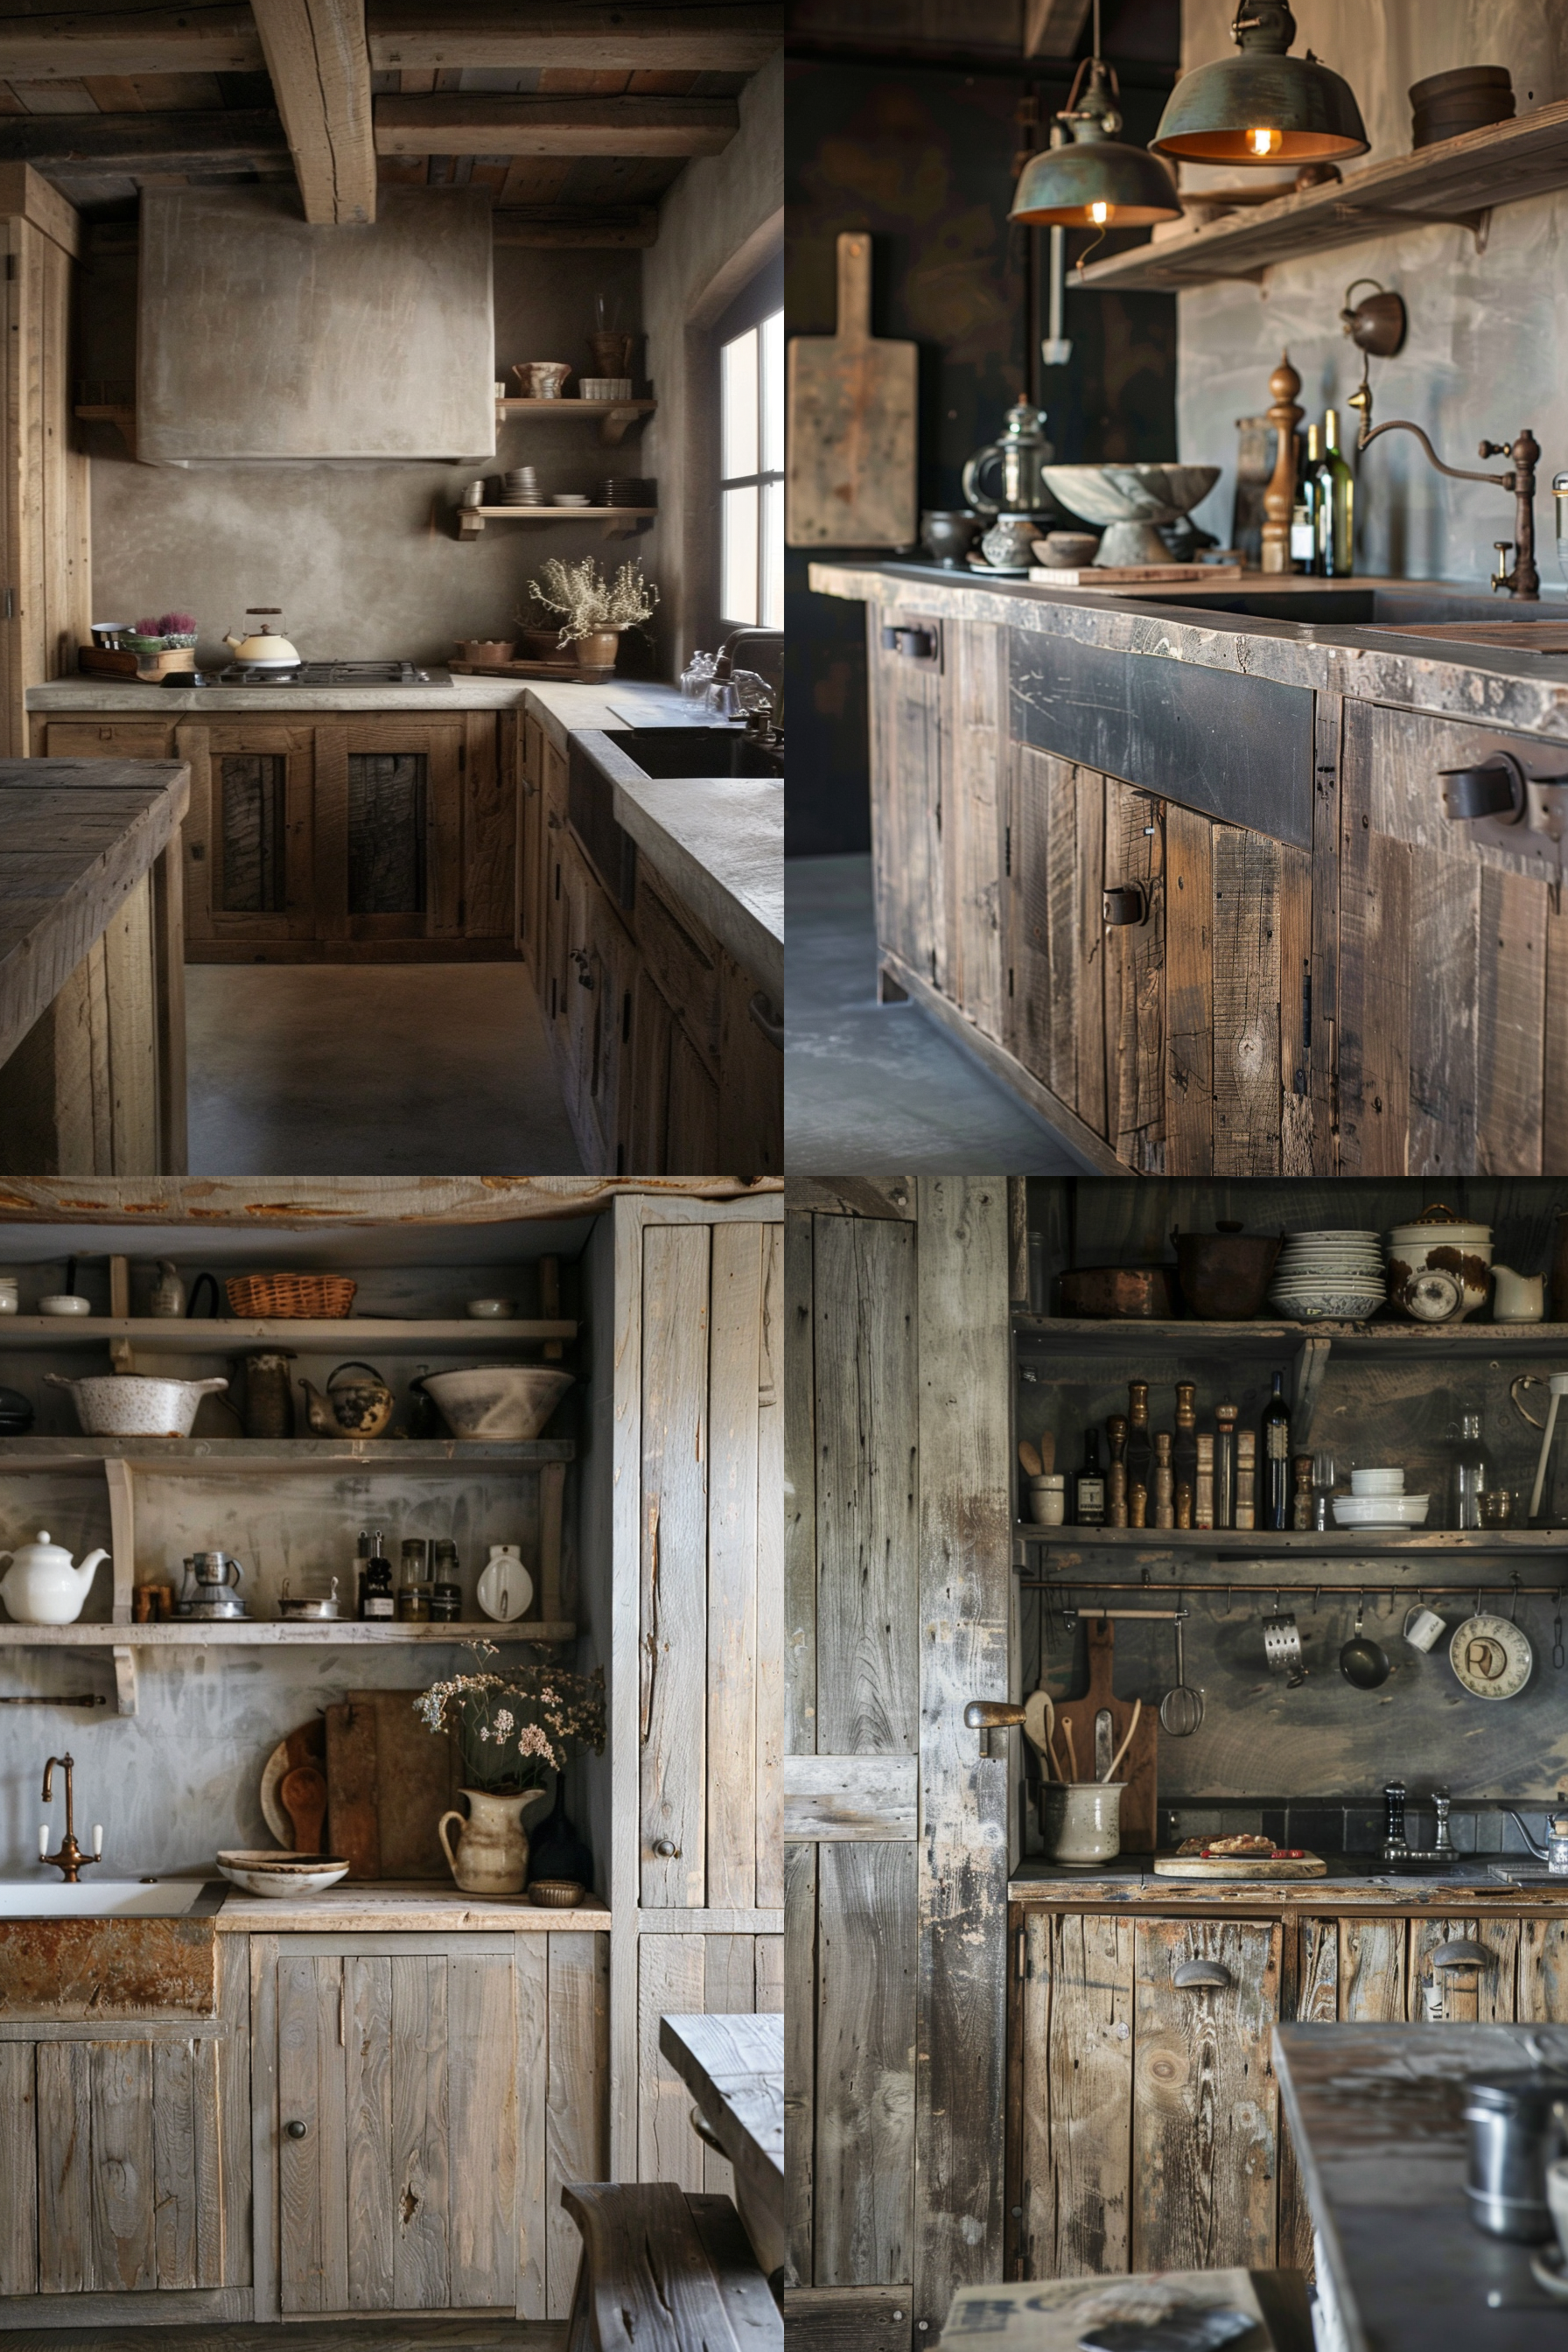 The image displays various perspectives of a rustic kitchen with a vintage aesthetic. The kitchen features wooden cabinetry, exposed beams, and a mix of open shelving and cupboards. Various pots, pans, and kitchen utensils are neatly organized in the space. There is a clear emphasis on the aged wood textures and the cozy, lived-in ambiance of the kitchen. The photo composition enhances the sense of a warm, homely environment with a focus on the textures and materials used throughout the space. Rustic kitchen interior with wooden cabinets, vintage utensils, and cozy farmhouse ambiance.